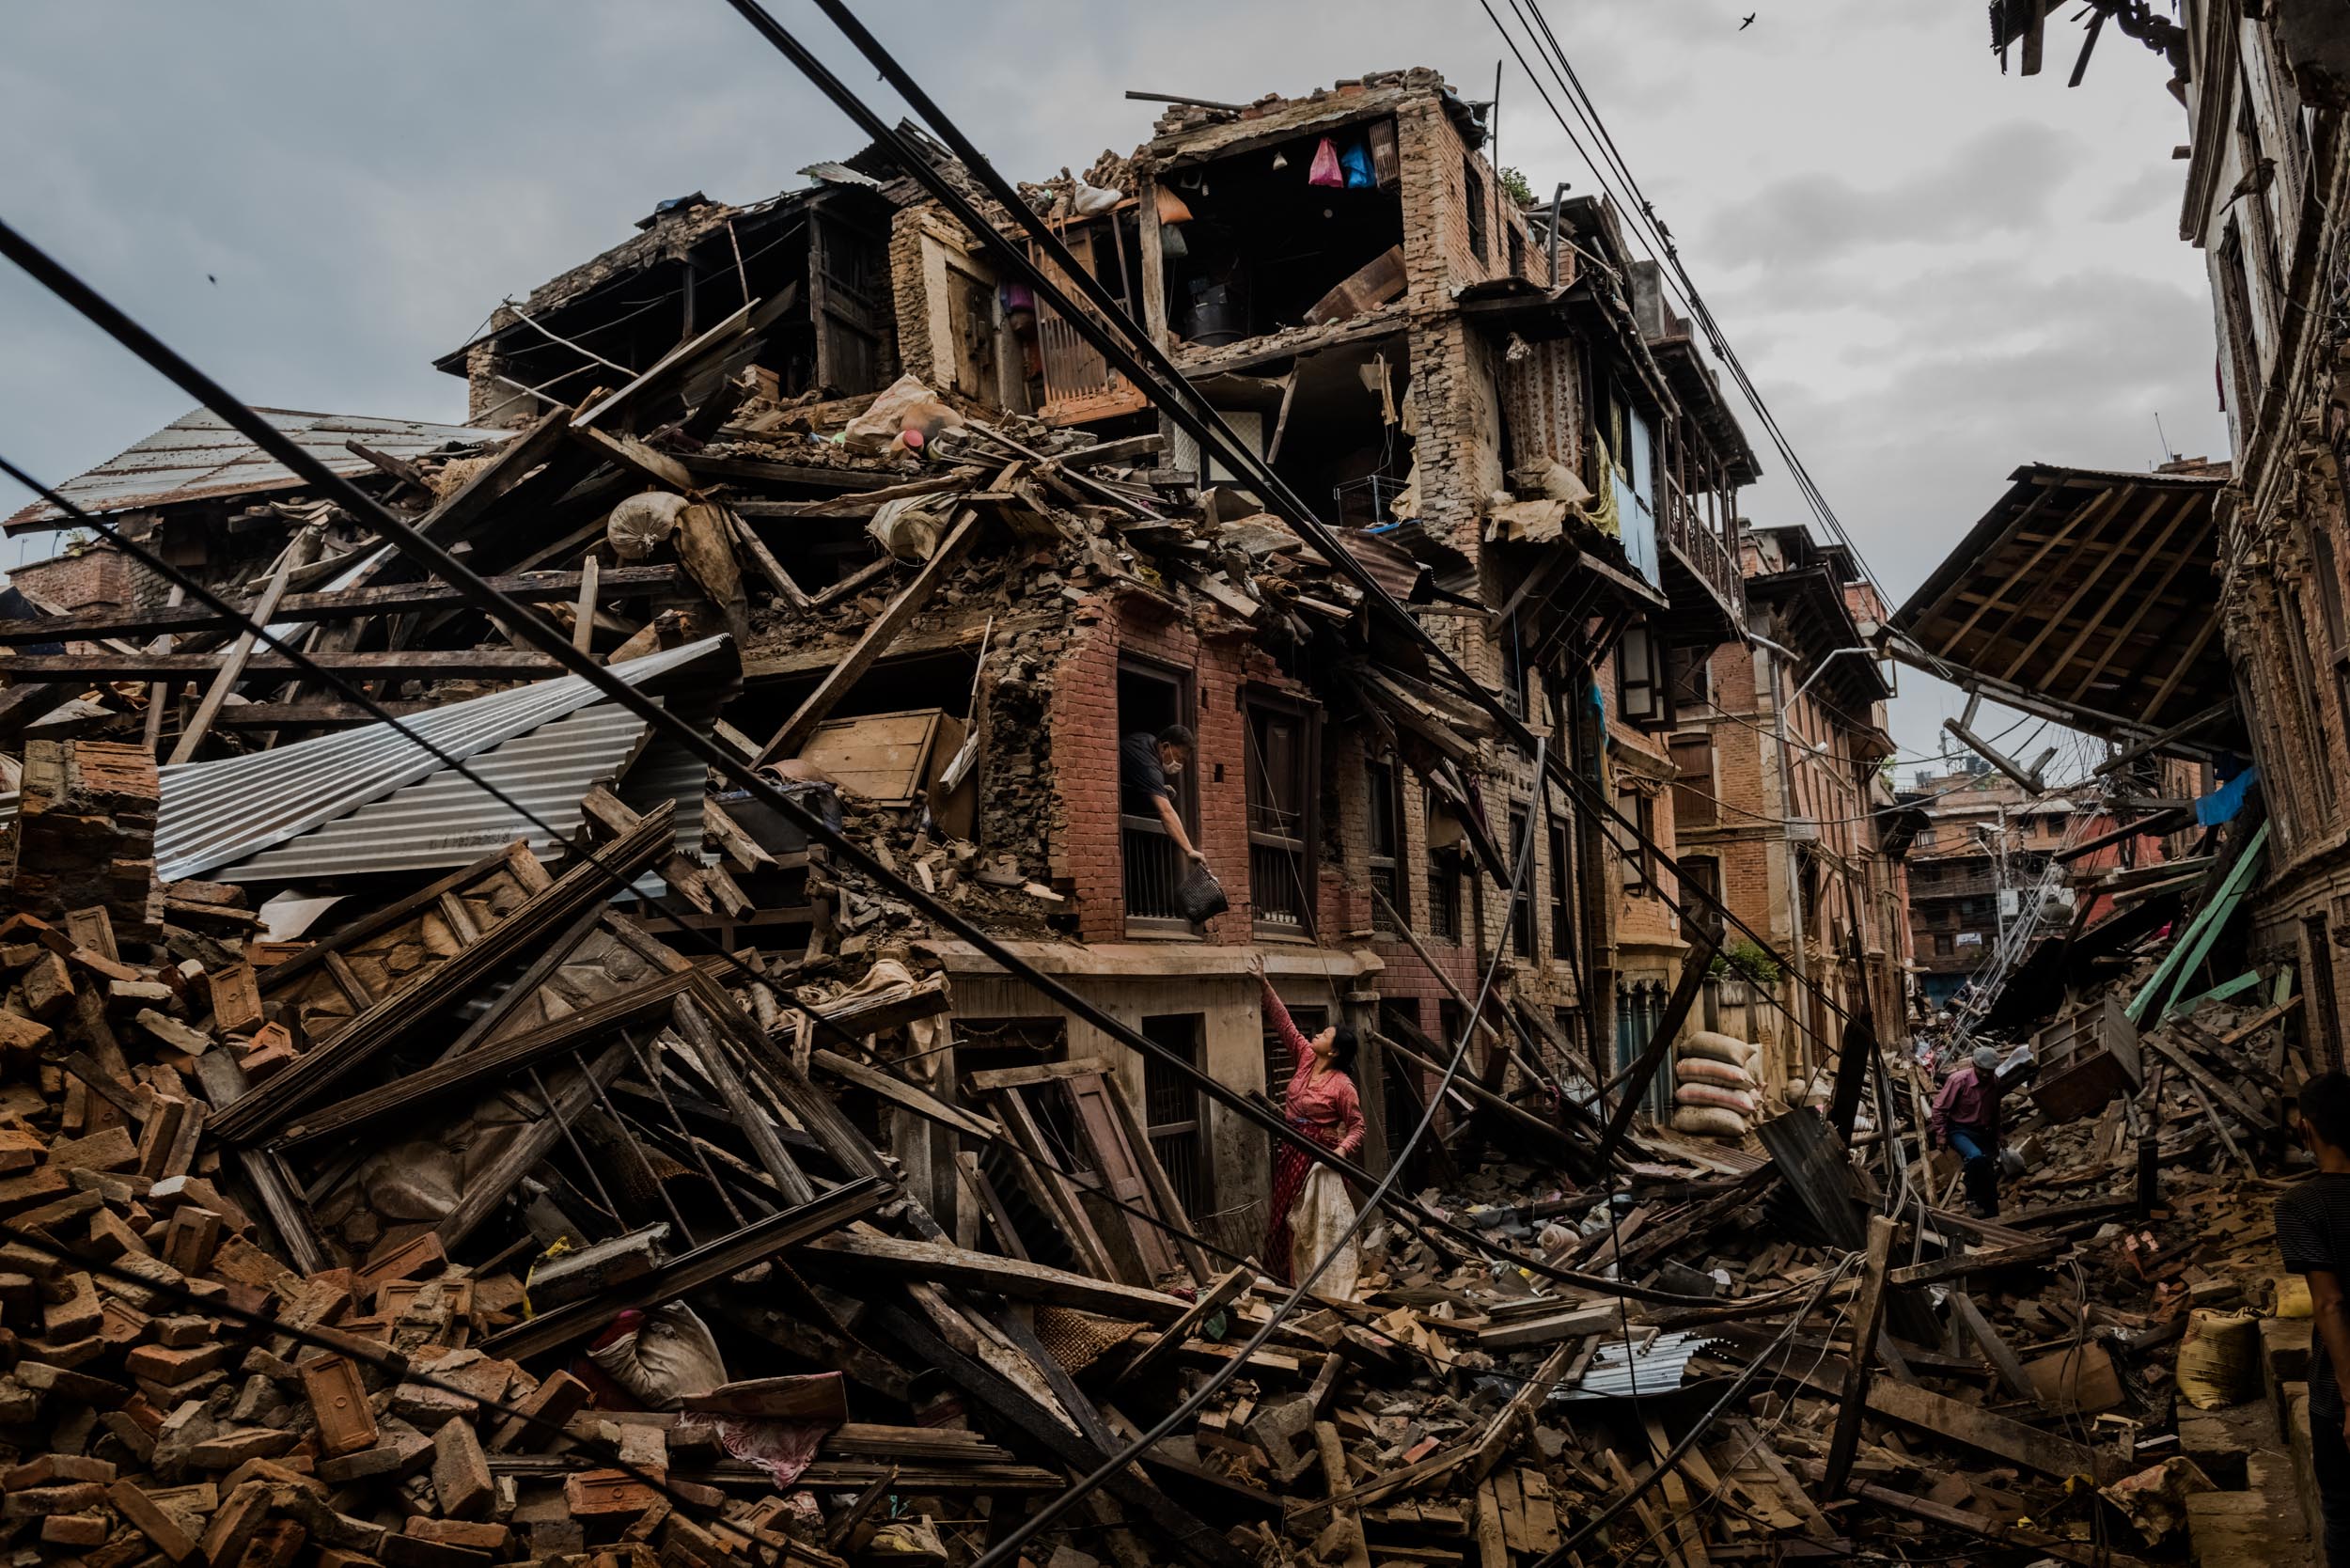  On the 25th of April, just before noon local time, as farmers were out in fields and people at home or work, a devastating earthquake struck Nepal, killing over 8,000 people and injuring more than 21,000 according to the United Nations Office for th